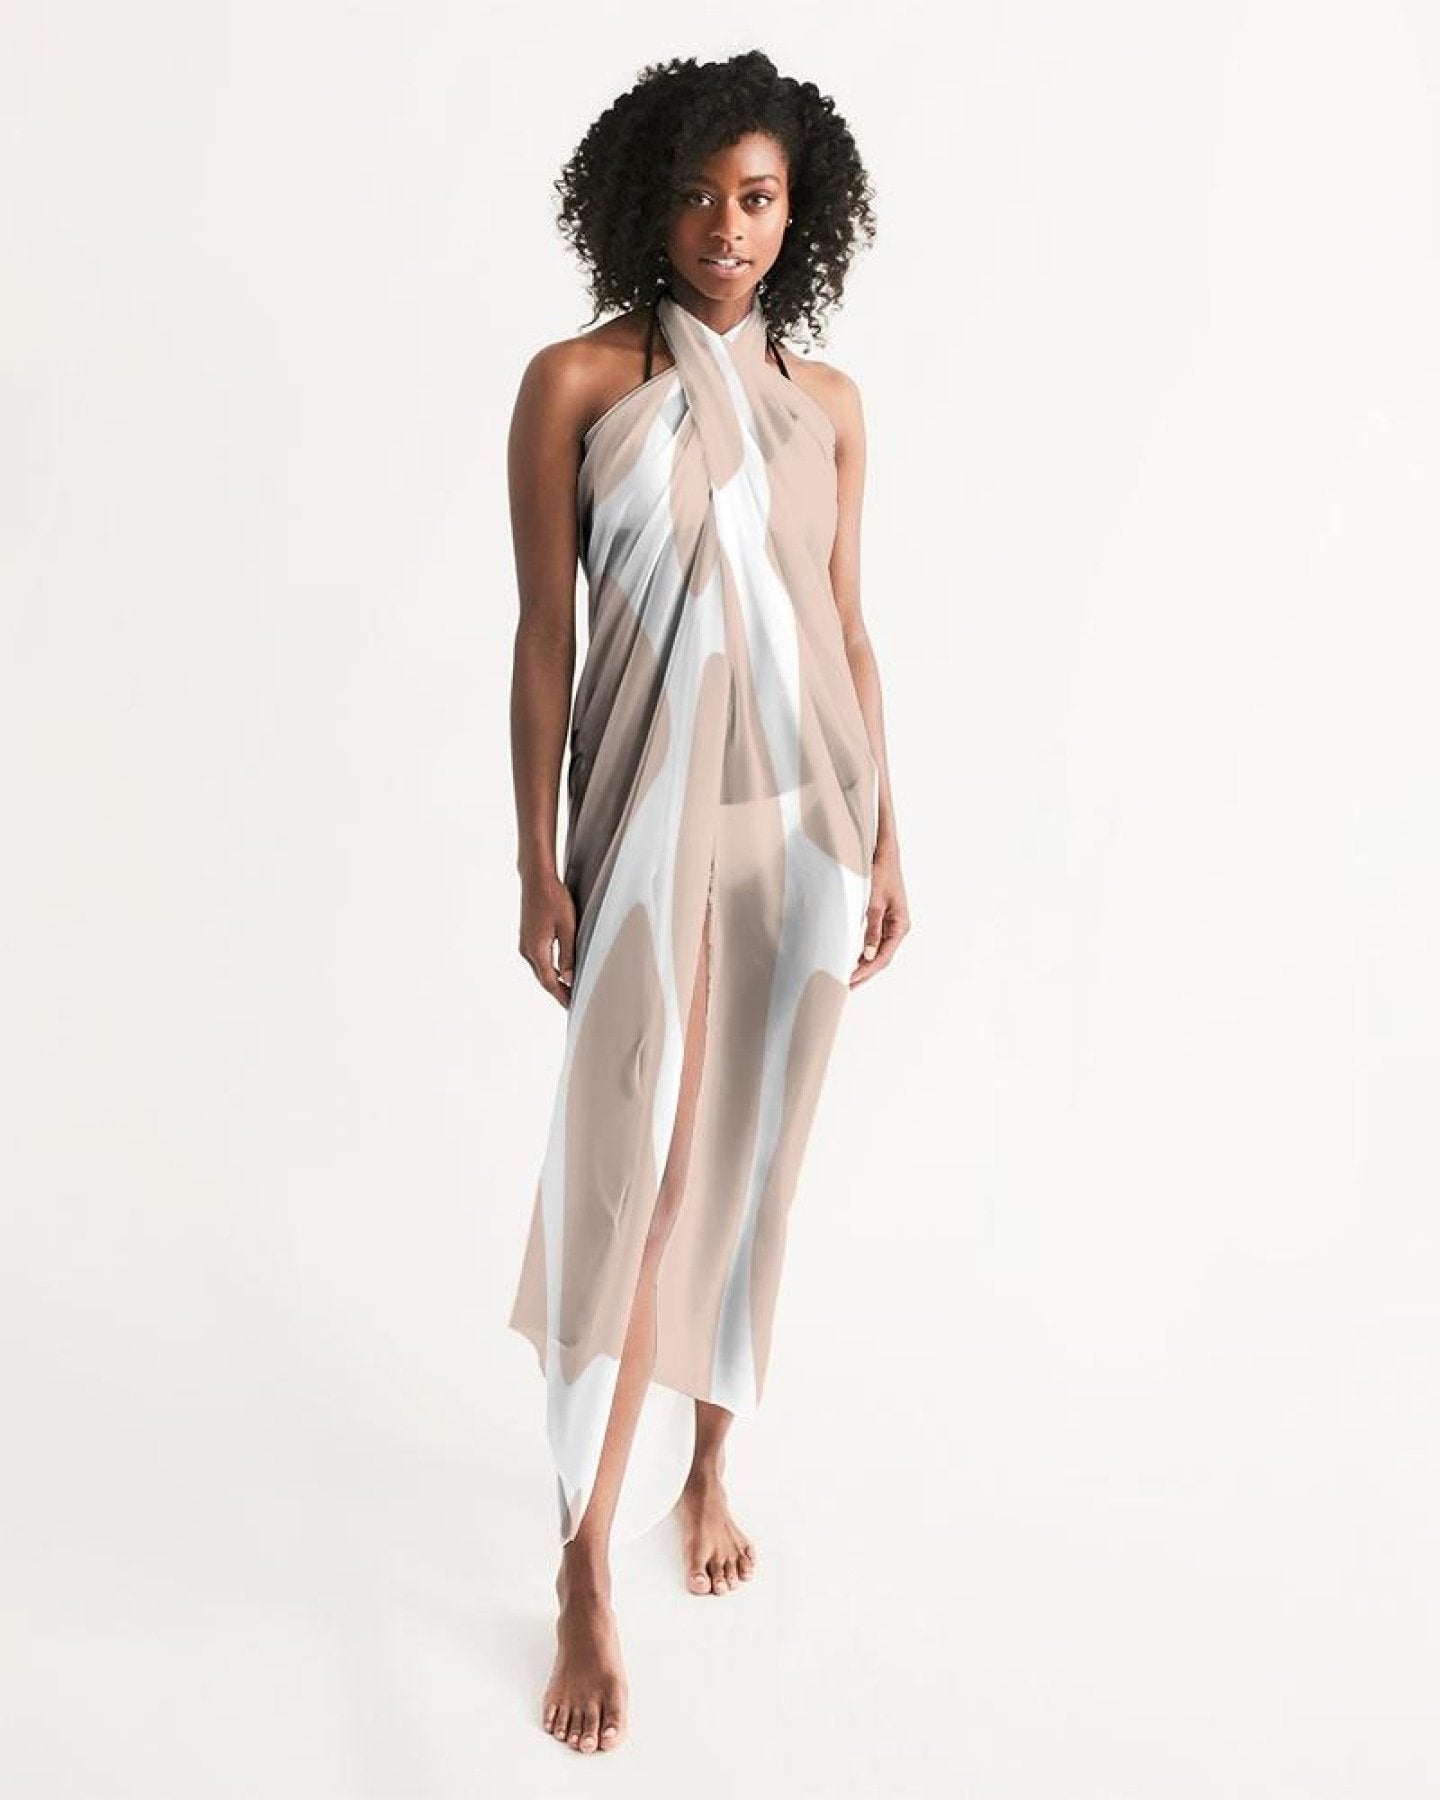 Buy Sheer Sarong Swimsuit Cover Up Wrap / Peach Abstract by inQue.Style